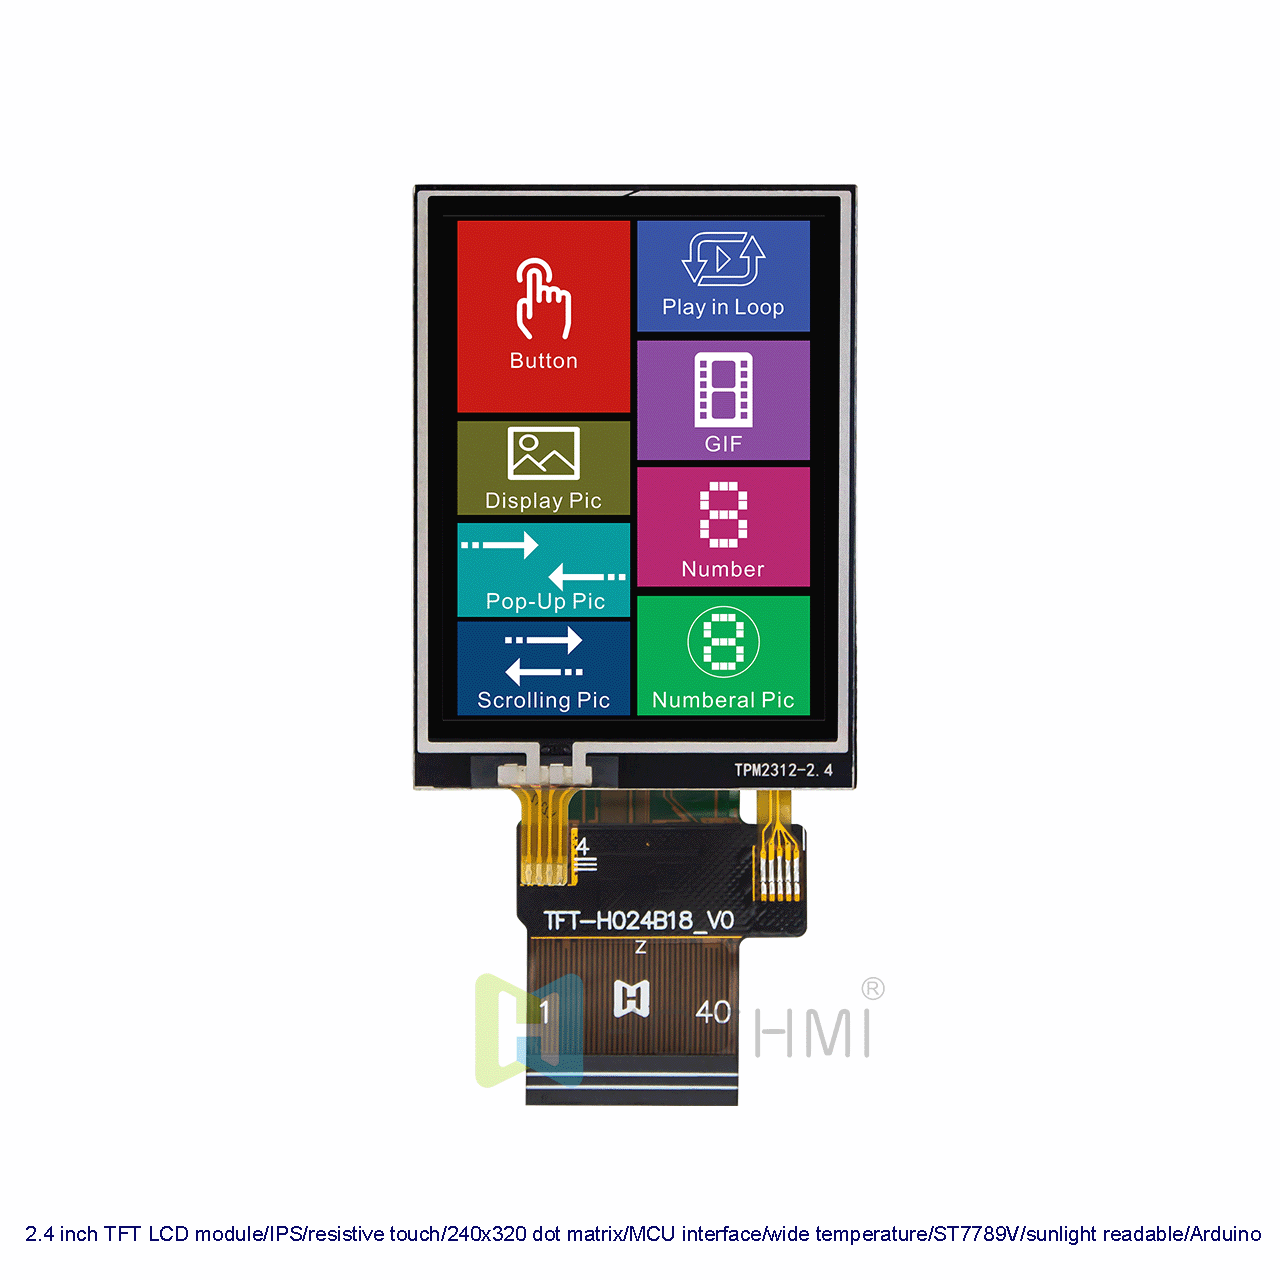 2.4 inch TFT LCD module/IPS/resistive touch/240x320 dot matrix/MCU interface/wide temperature/ST7789V/sunlight readable/Arduino compatible